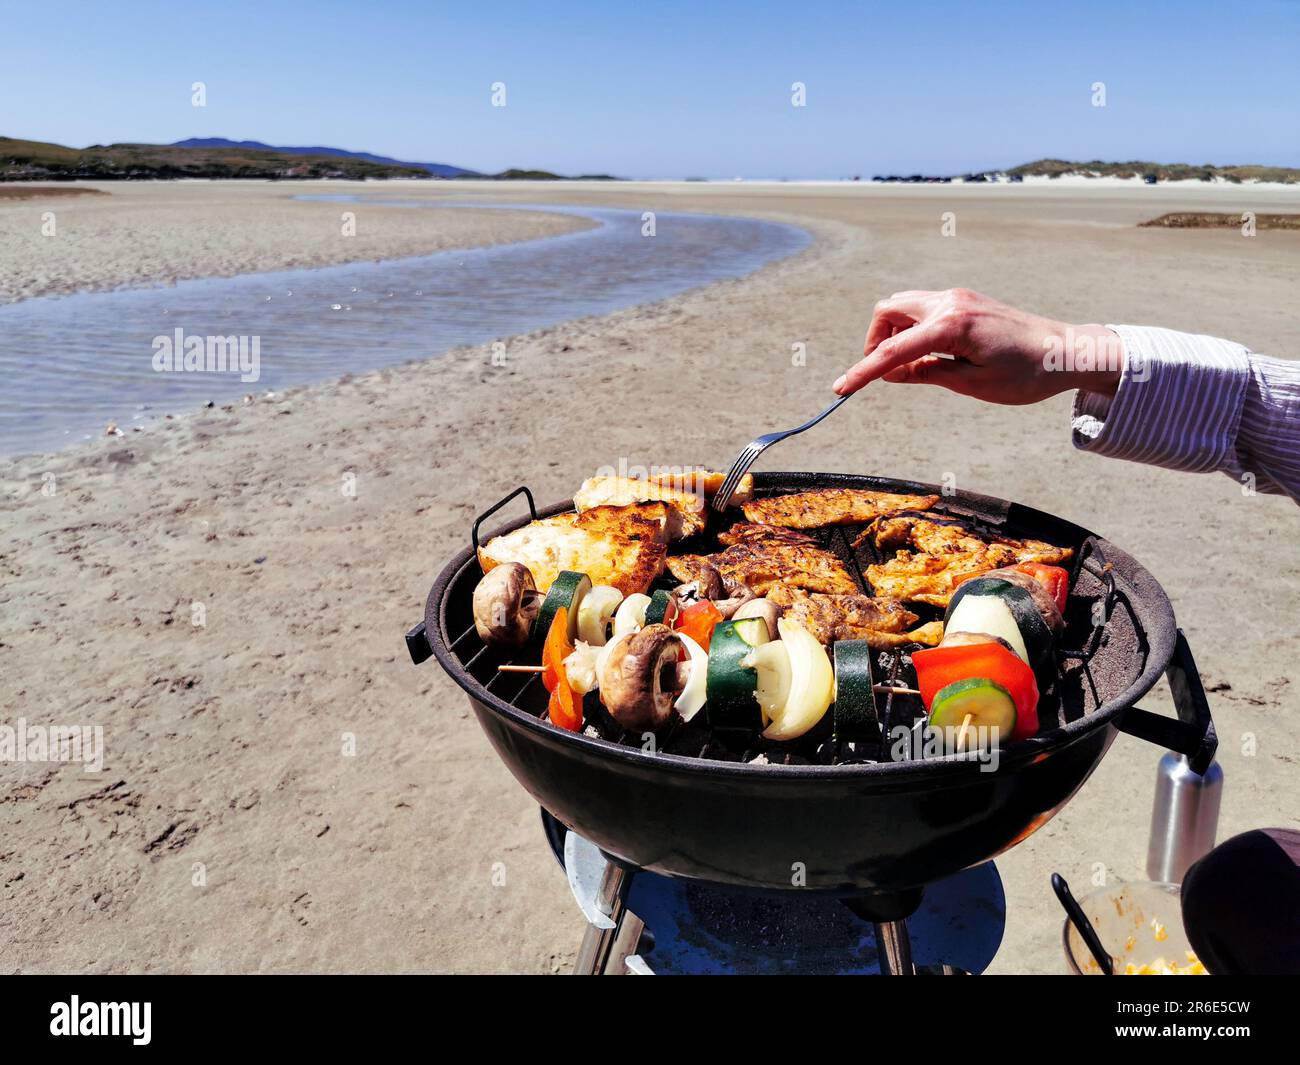 Making barbecue grill on sandy beach surrounded by mountains at Silver Strand, Thallabawn, Doovilra, Louisburgh, Co. Mayo, Ireland Stock Photo